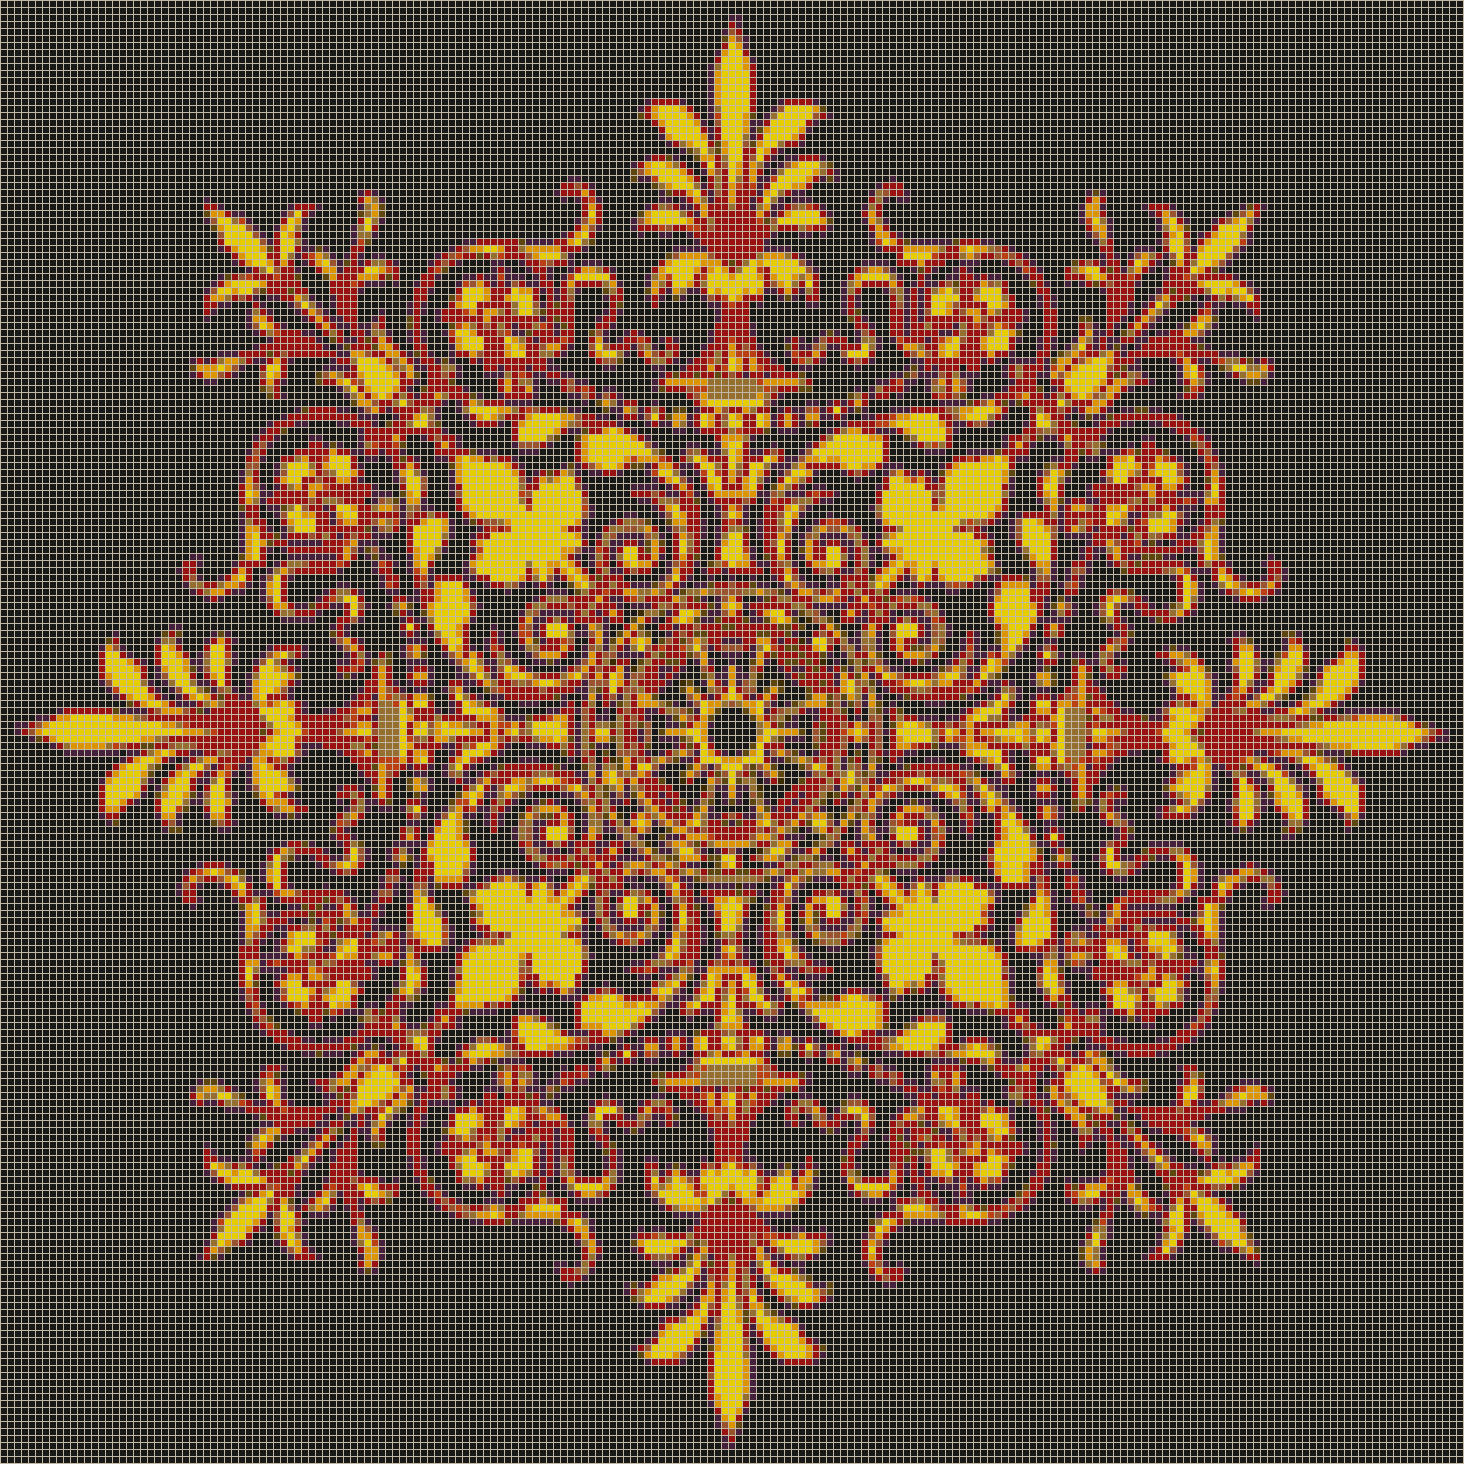 Victorian Ornament (Red-Yellow on Black) - Mosaic Tile Picture Art